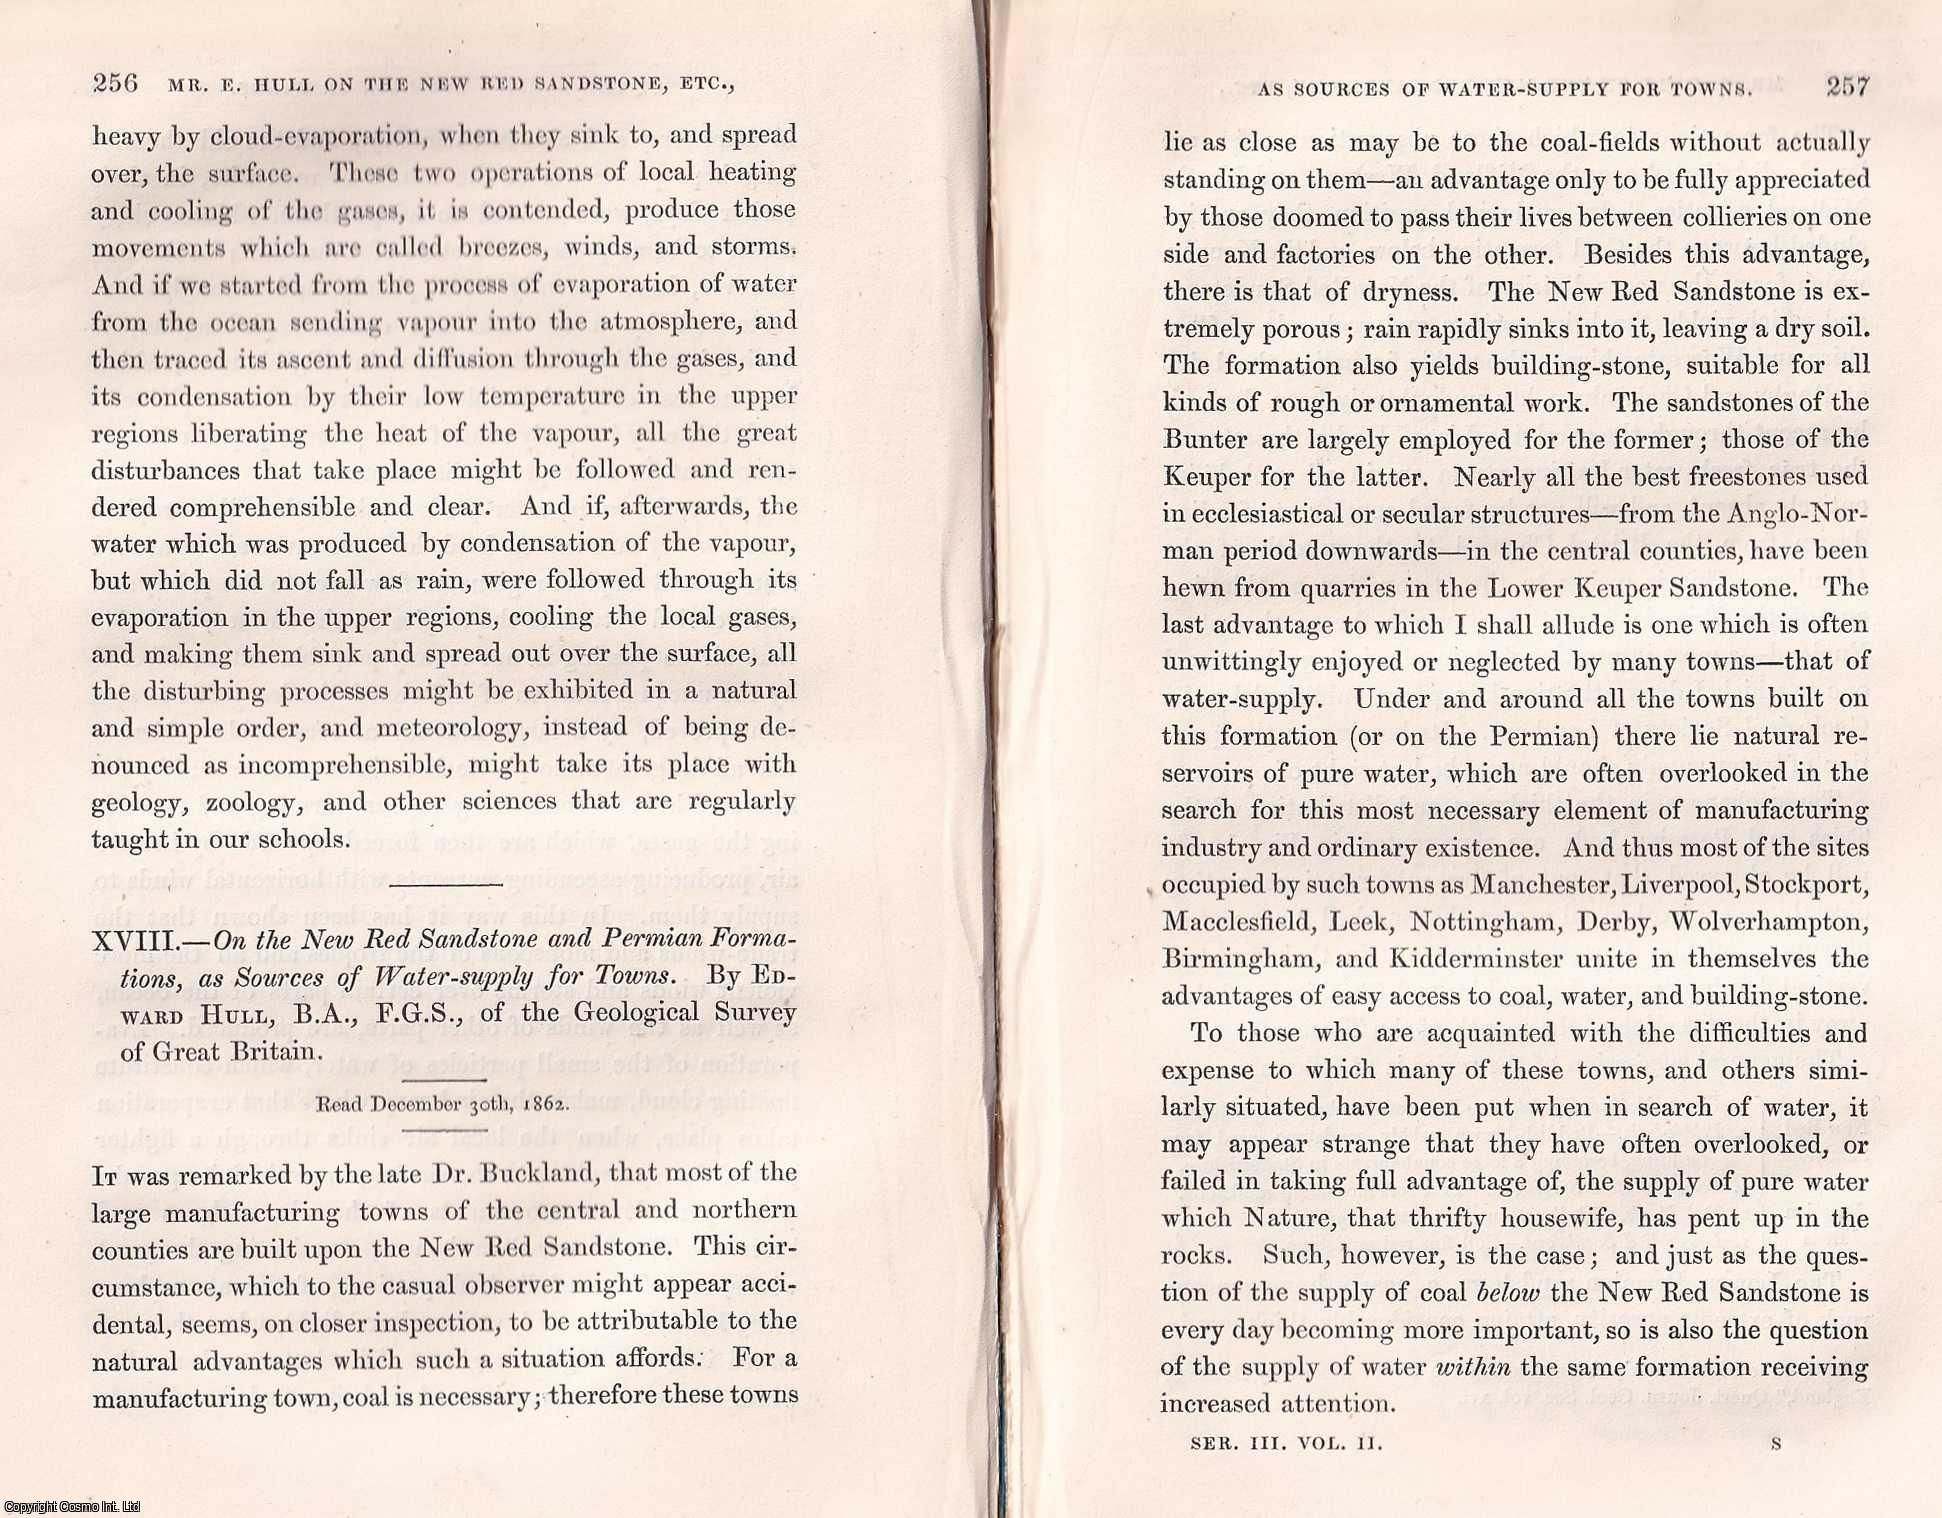 Edward Hull - The New Red Sandstone and Permian Formations, as Sources of Water-Supply for Towns. An original article from the Memoirs of the Literary and Philosophical Society of Manchester, 1865.